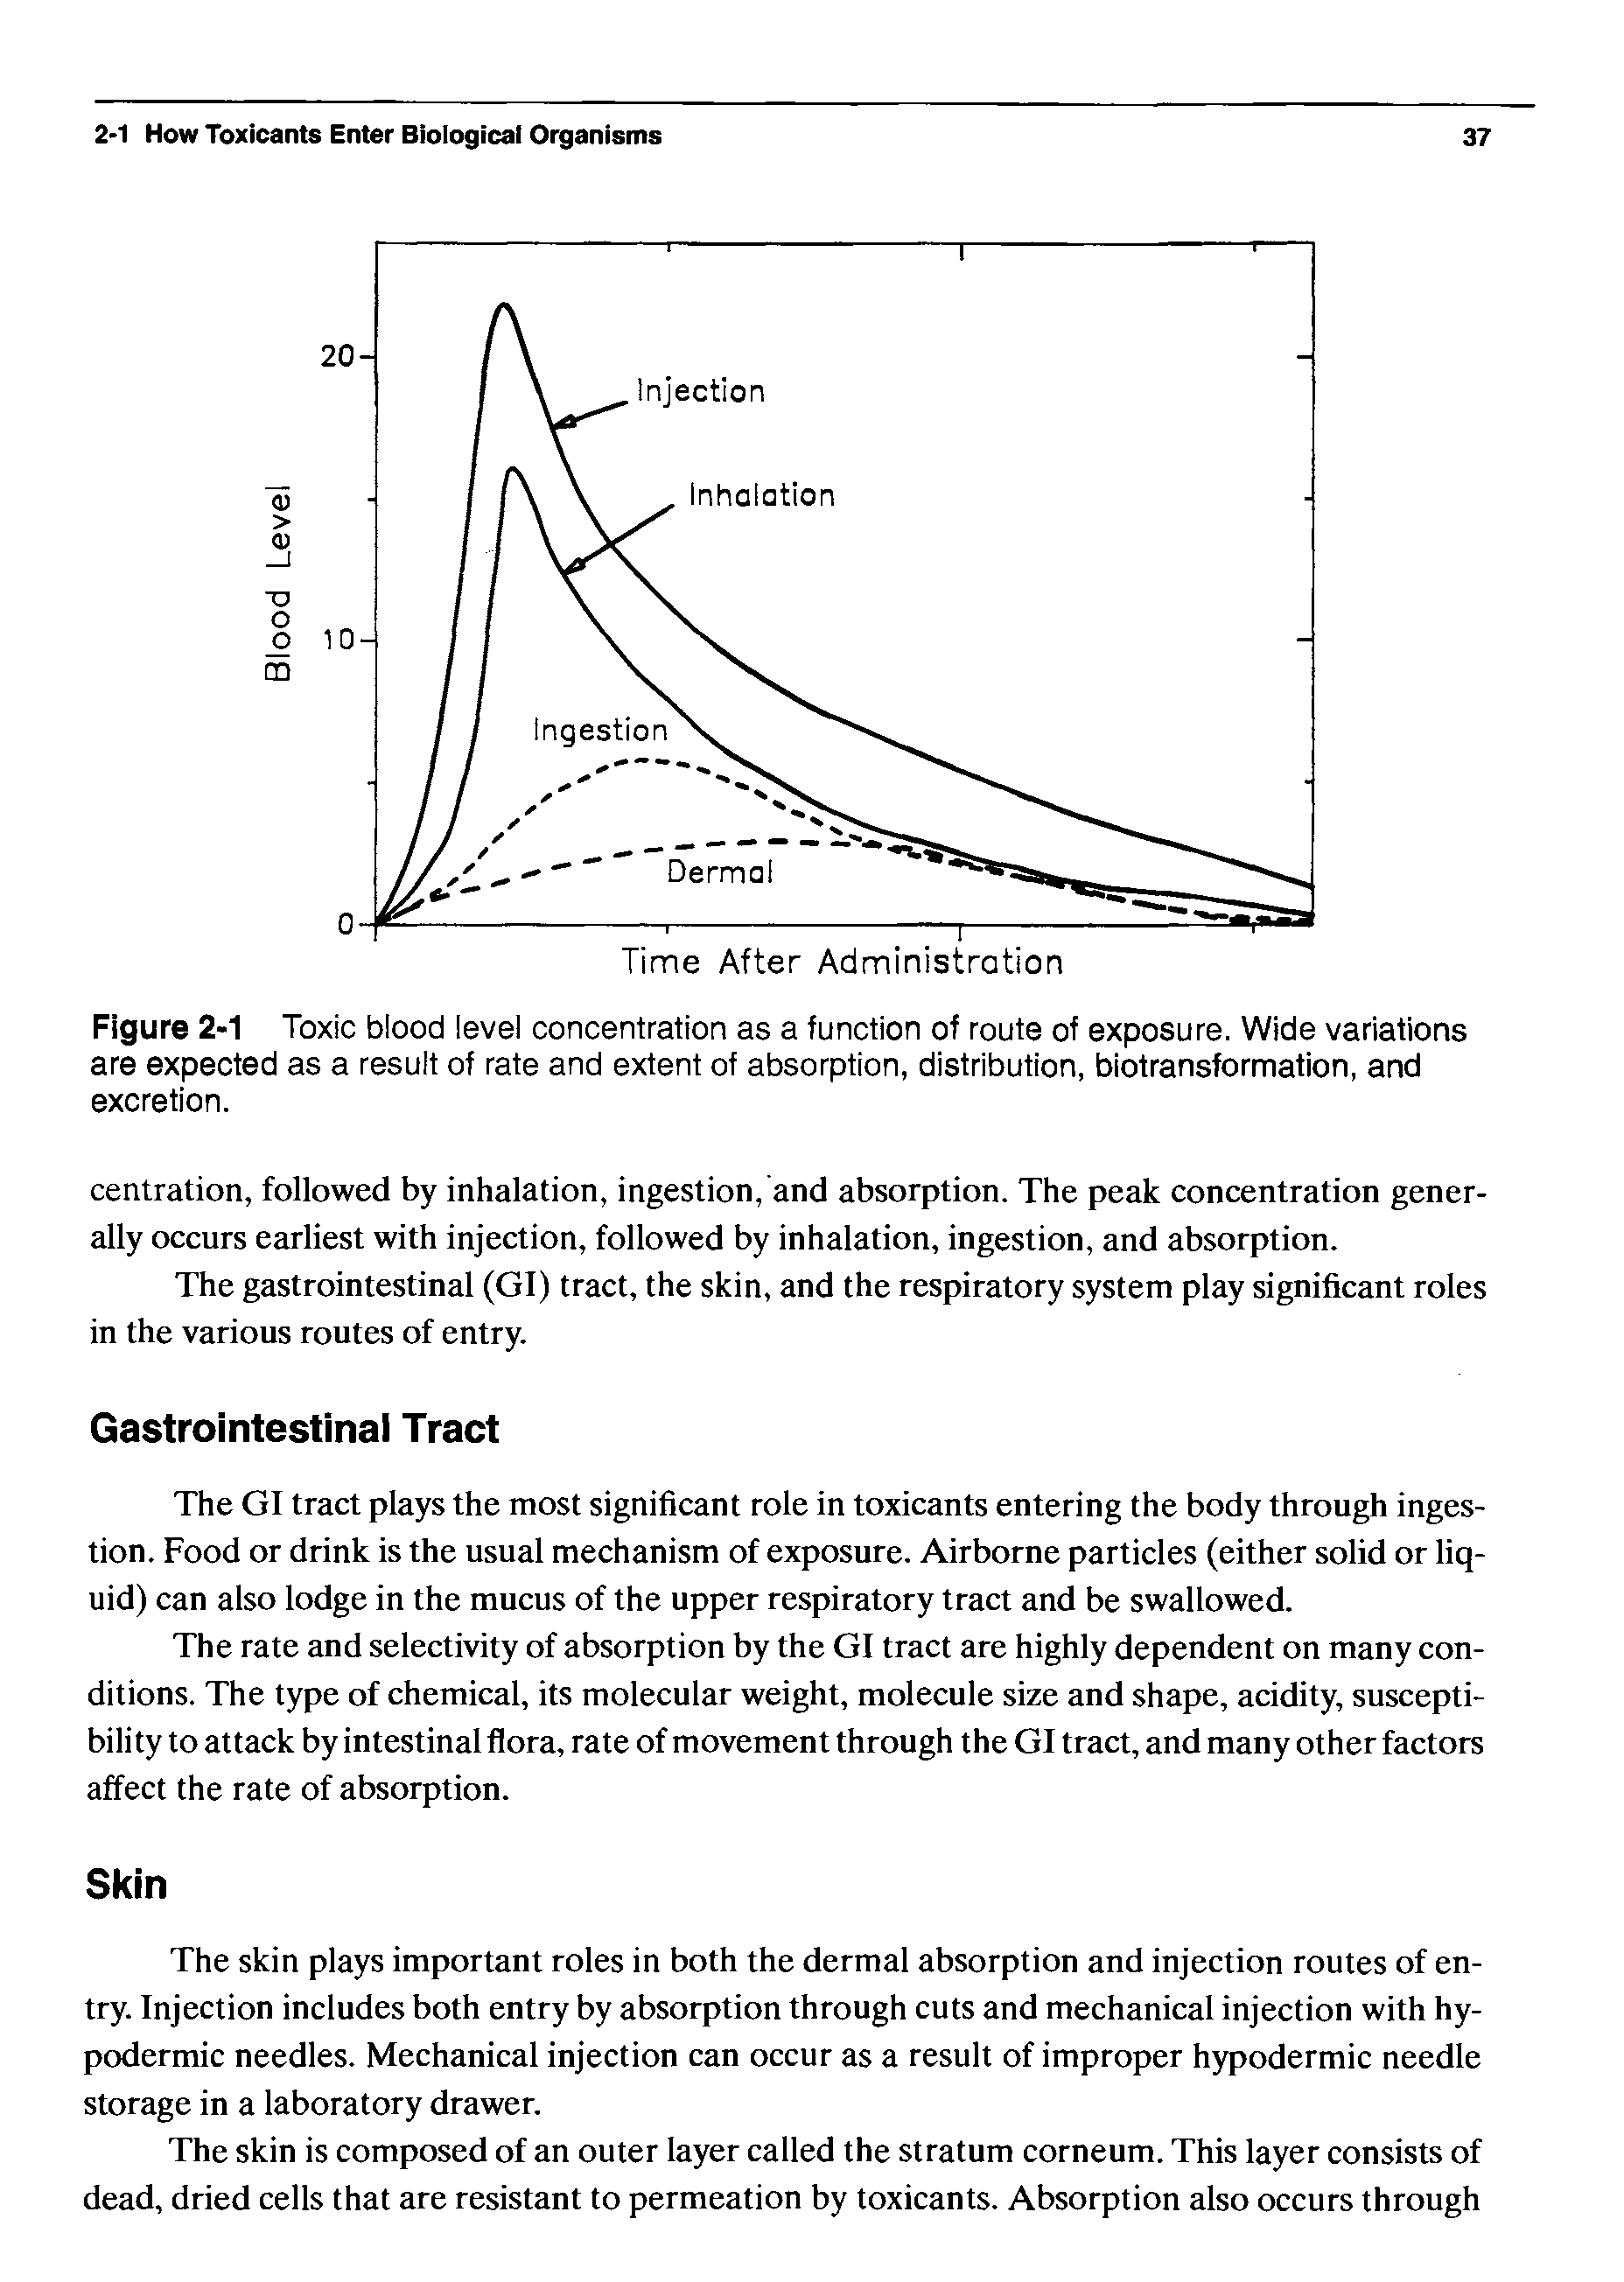 Figure 2-1 Toxic blood level concentration as a function of route of exposure. Wide variations are expected as a result of rate and extent of absorption, distribution, biotransformation, and excretion.